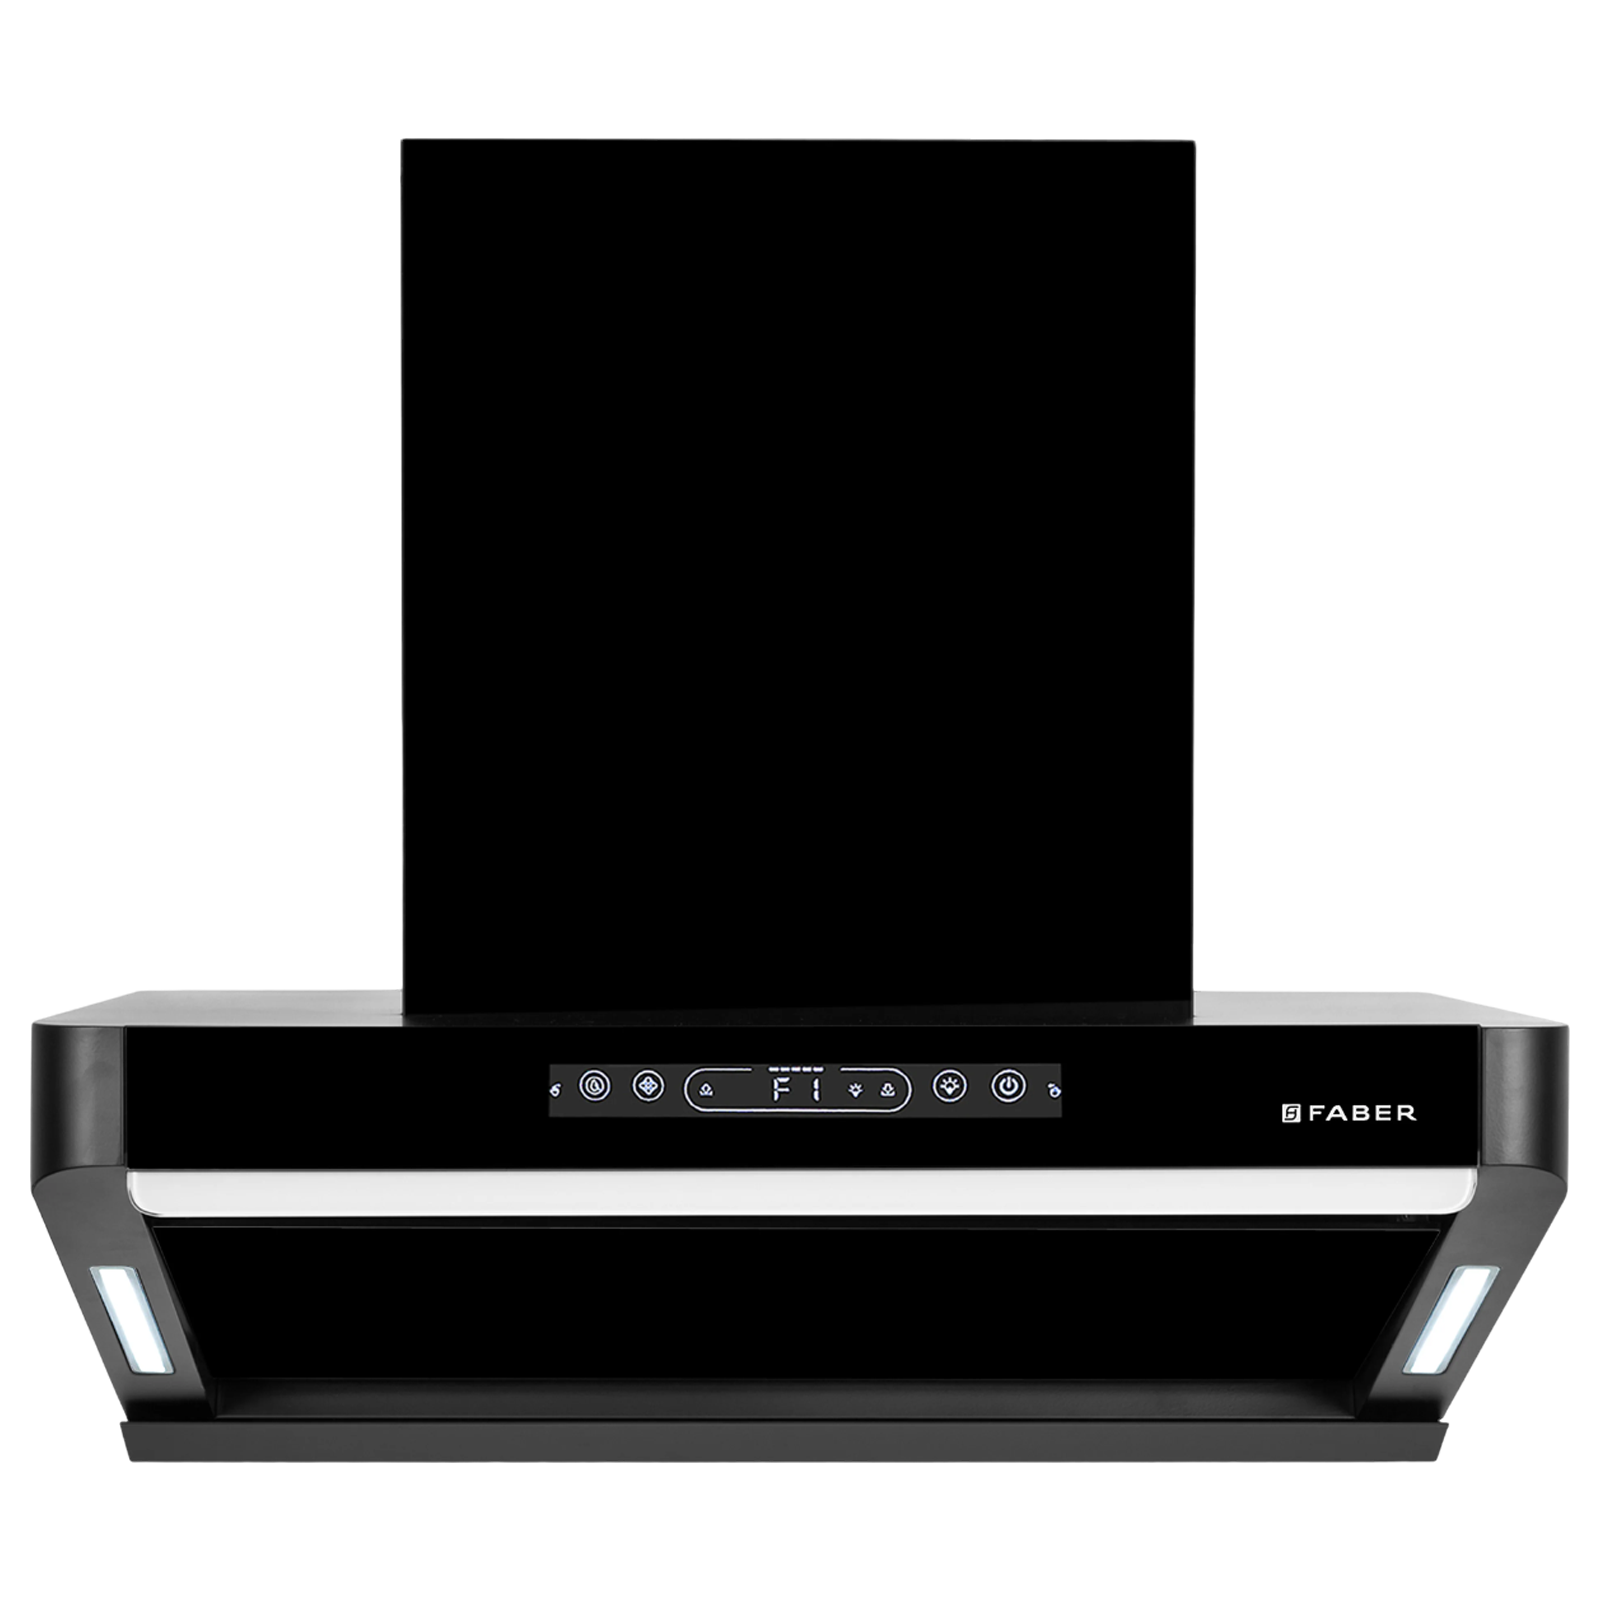 FABER Hood Pinnacle 60cm 1500m3/hr Ductless Auto Clean Wall Mounted Chimney with Touch and Gesture Control (Black)